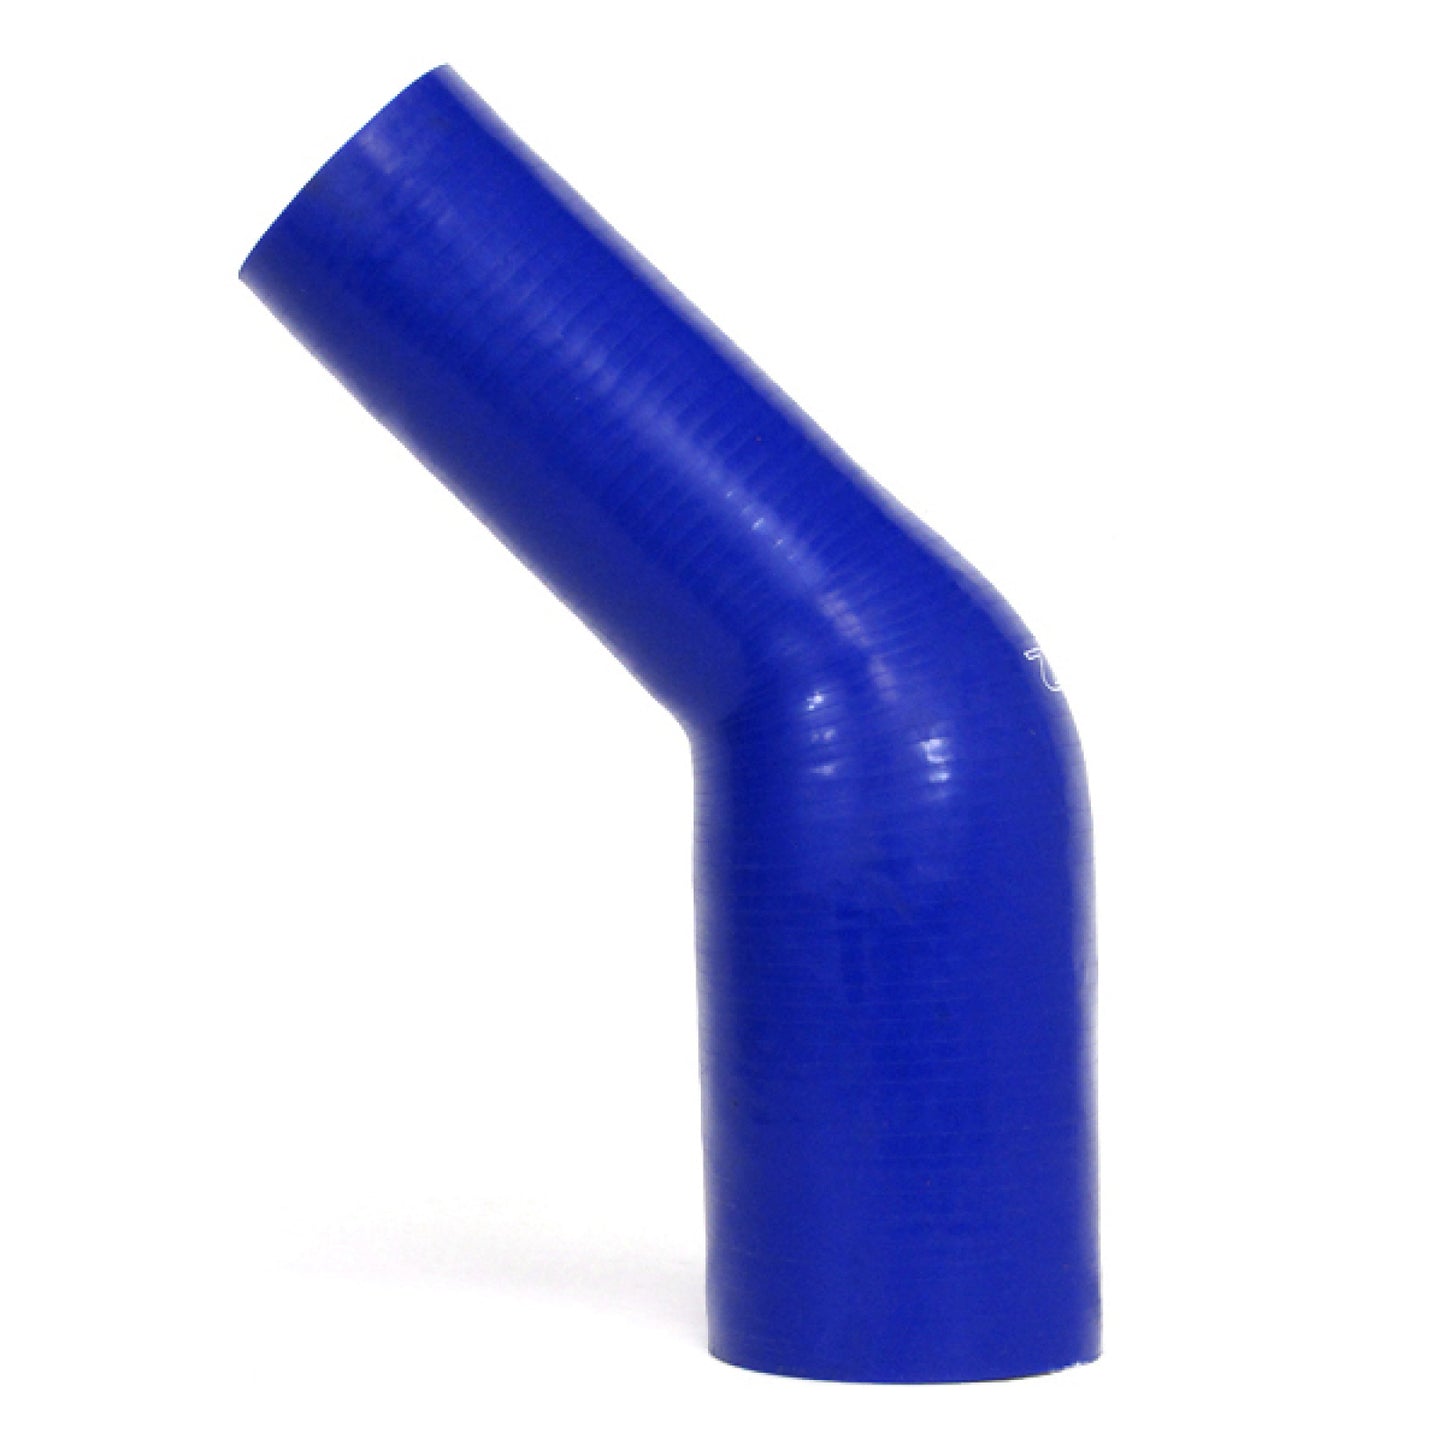 HPS Performance HTSER45-050-075-BLUE Silicone Elbow Reducer - 45 Degree